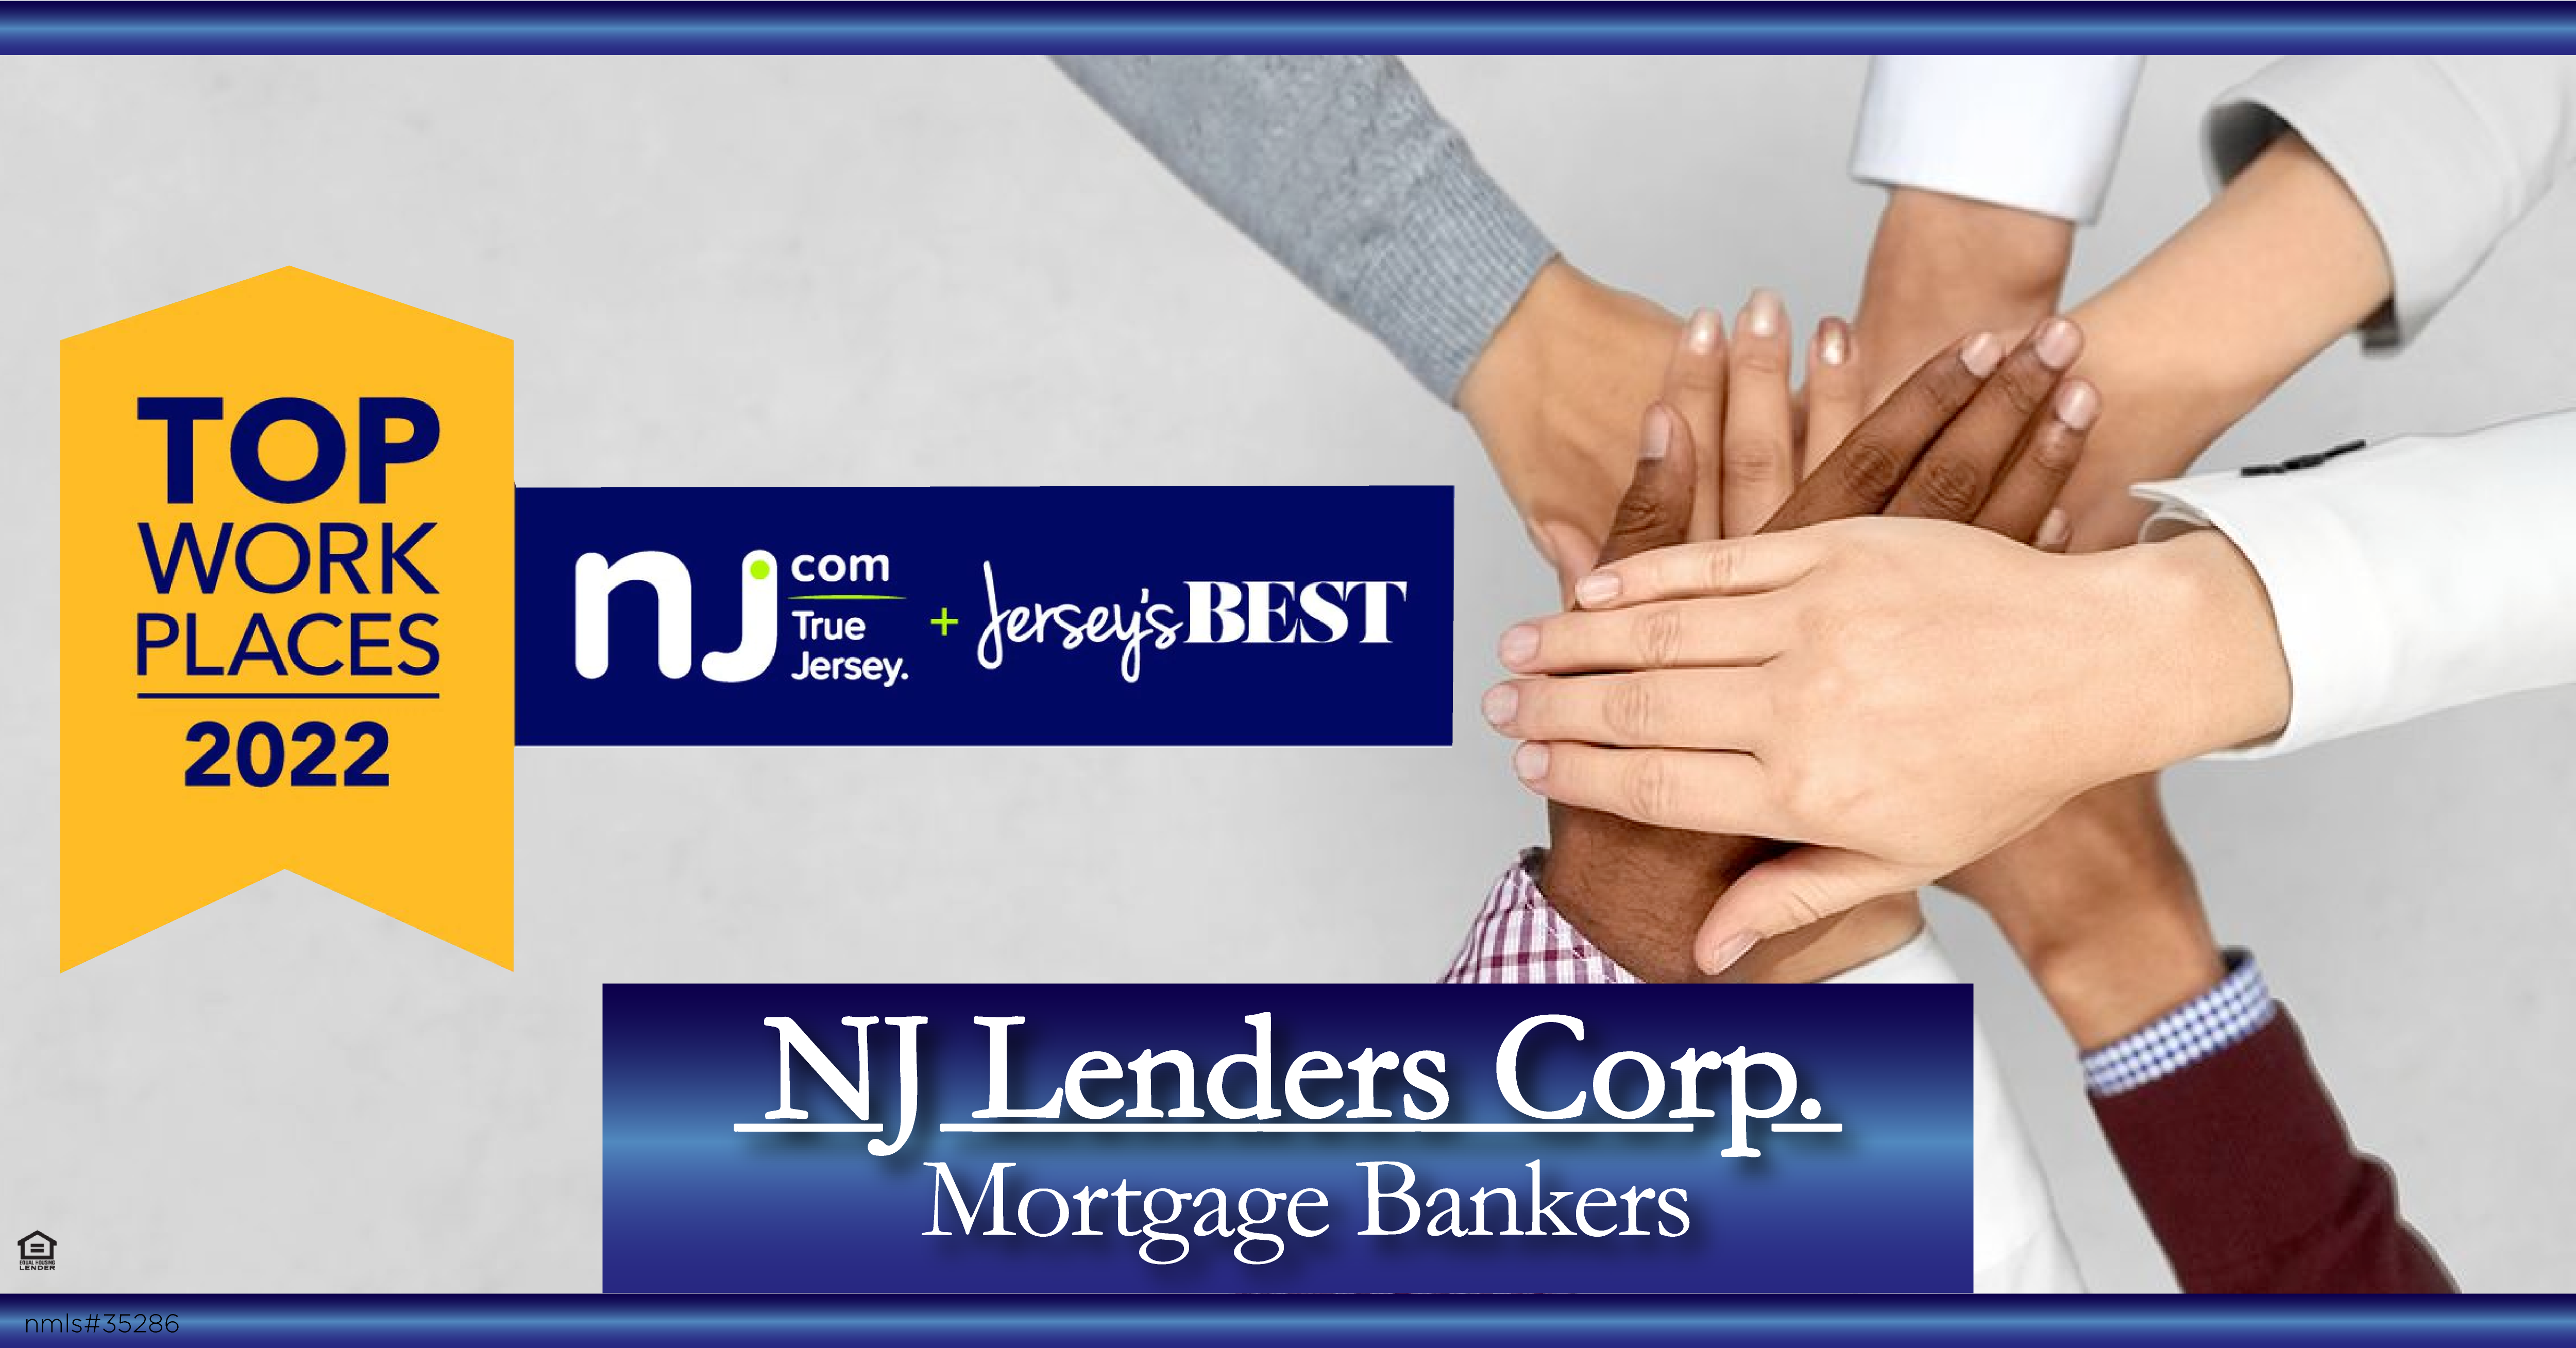 NJ Lenders Corp. named #1 on New Jersey’s Top Workplaces list